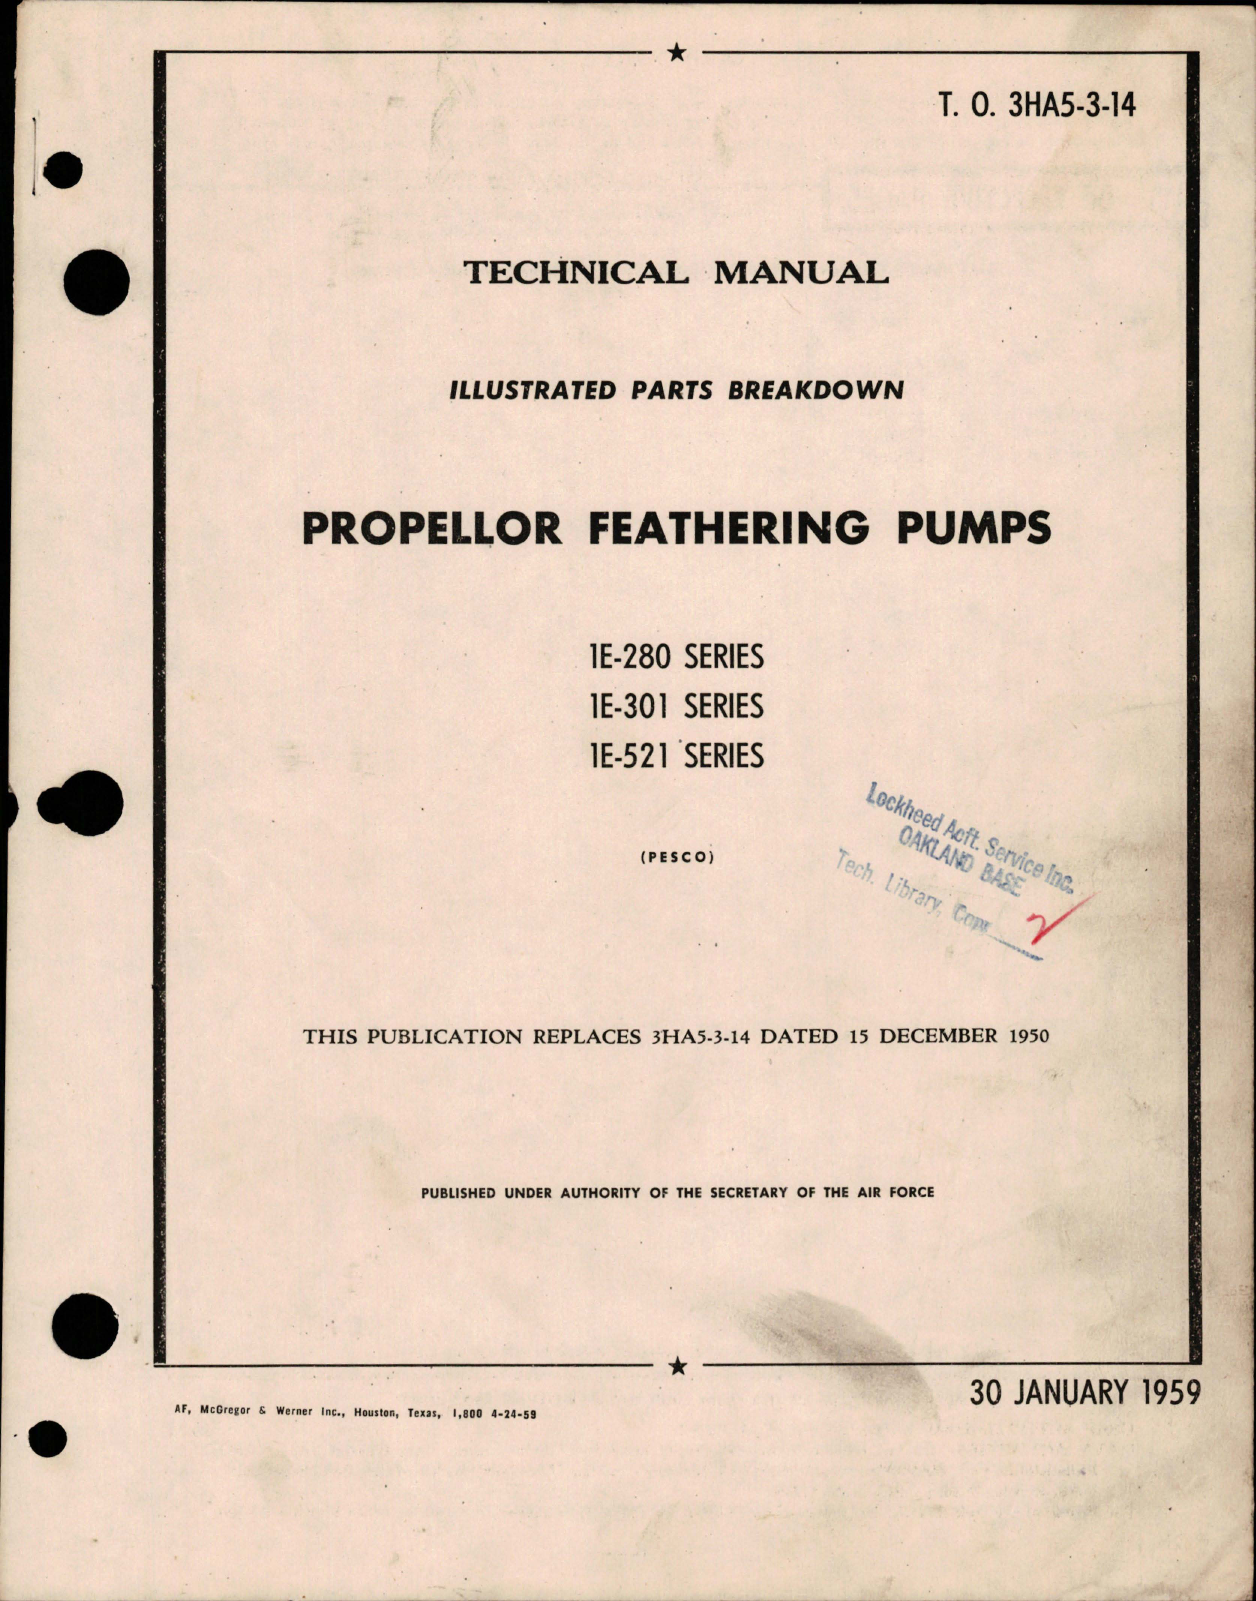 Sample page 1 from AirCorps Library document: Illustrated Parts Breakdown for Propeller Feathering Pumps - 1E-280, 1E-301, 1E-521 Series